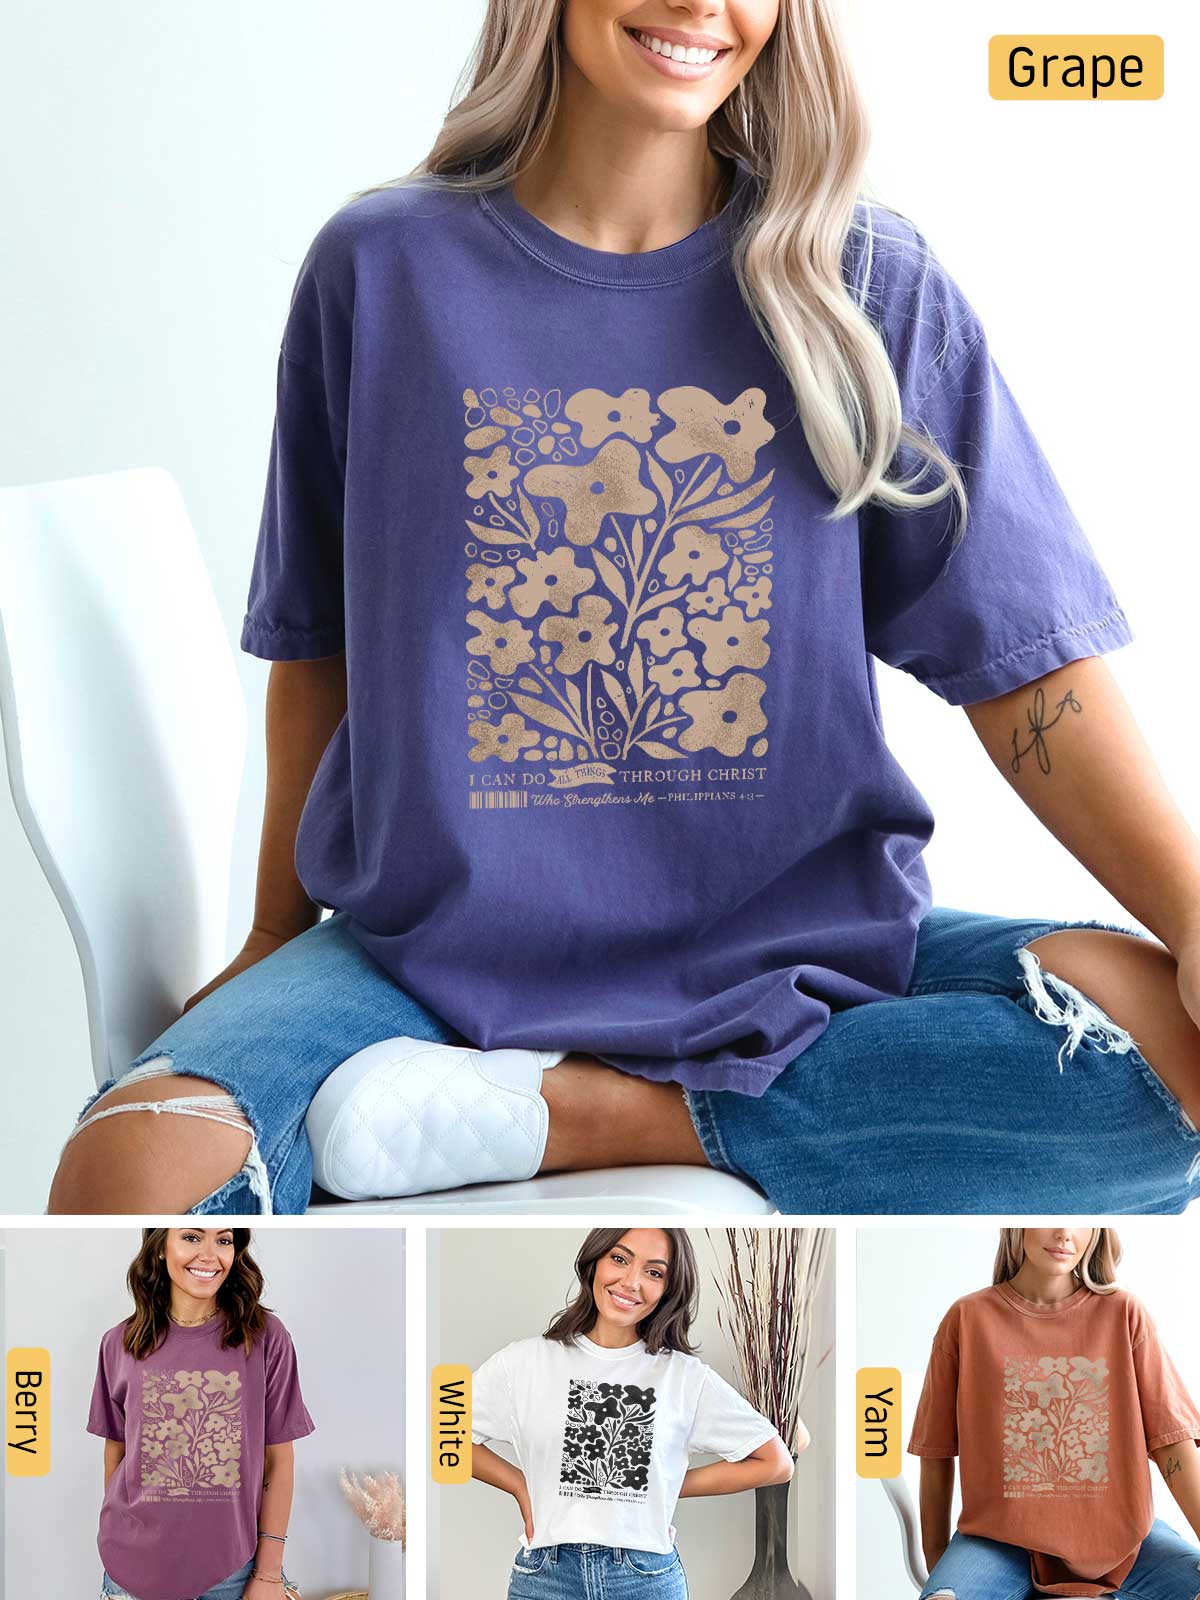 a woman sitting on a chair wearing a t - shirt with flowers on it